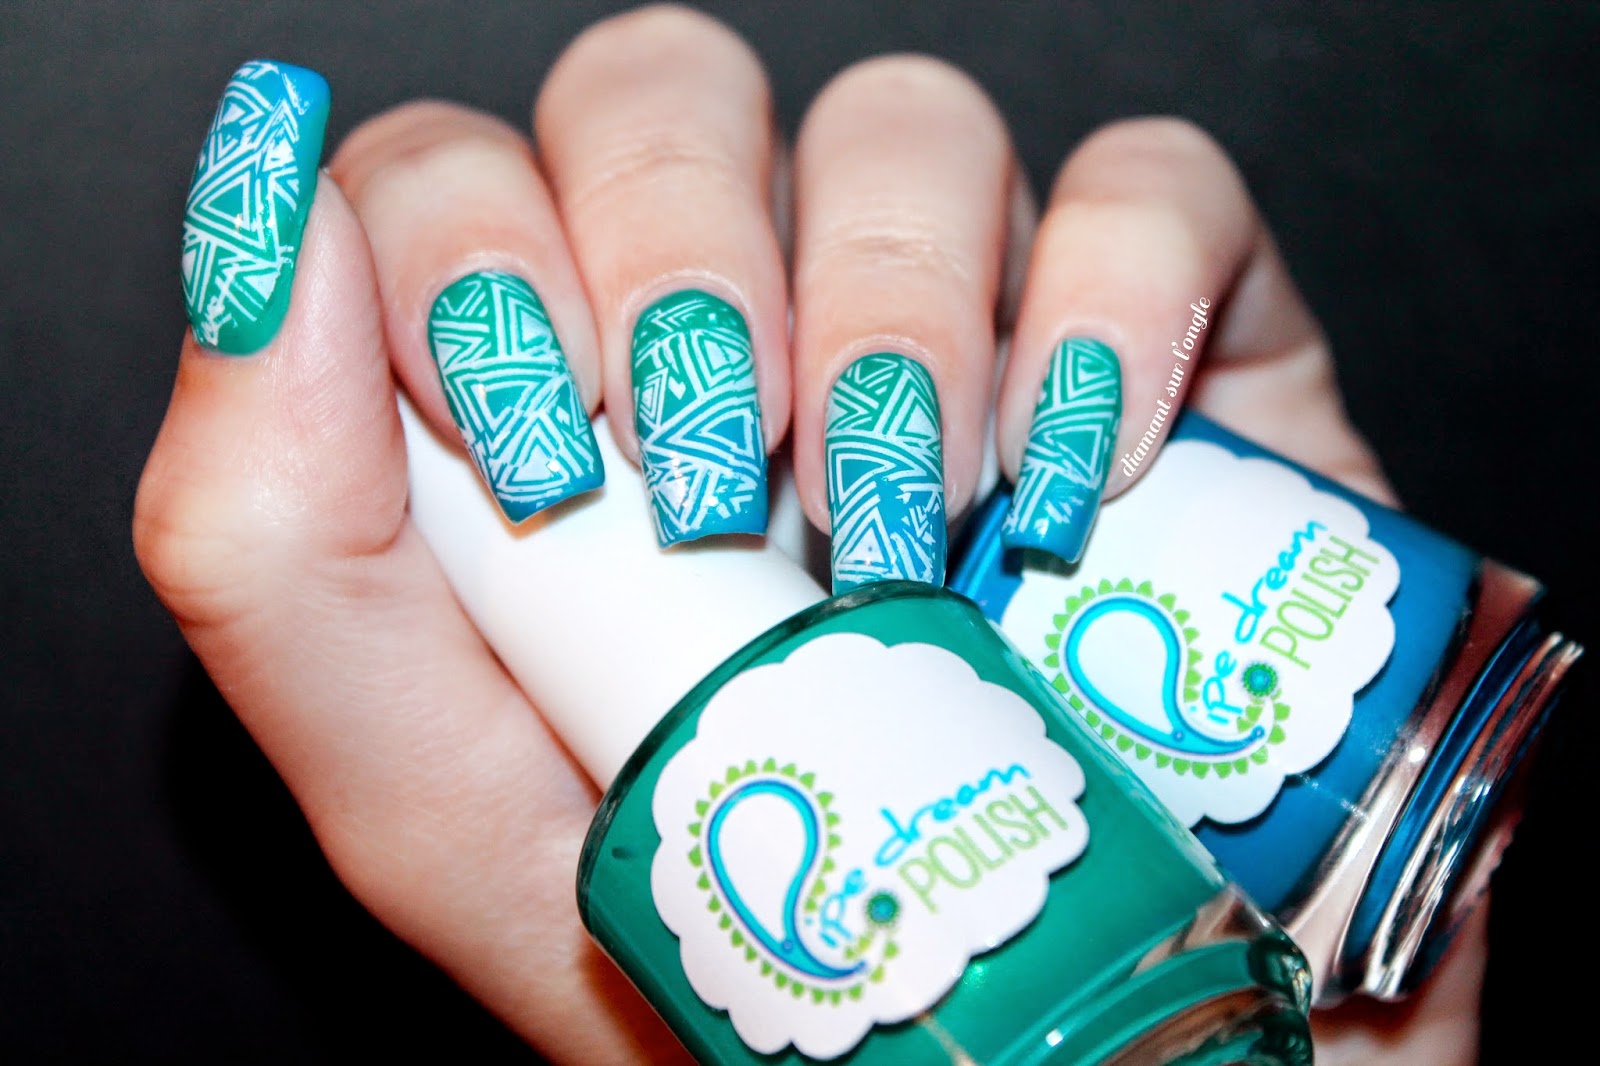 teal neon gradient nail art and white stamping